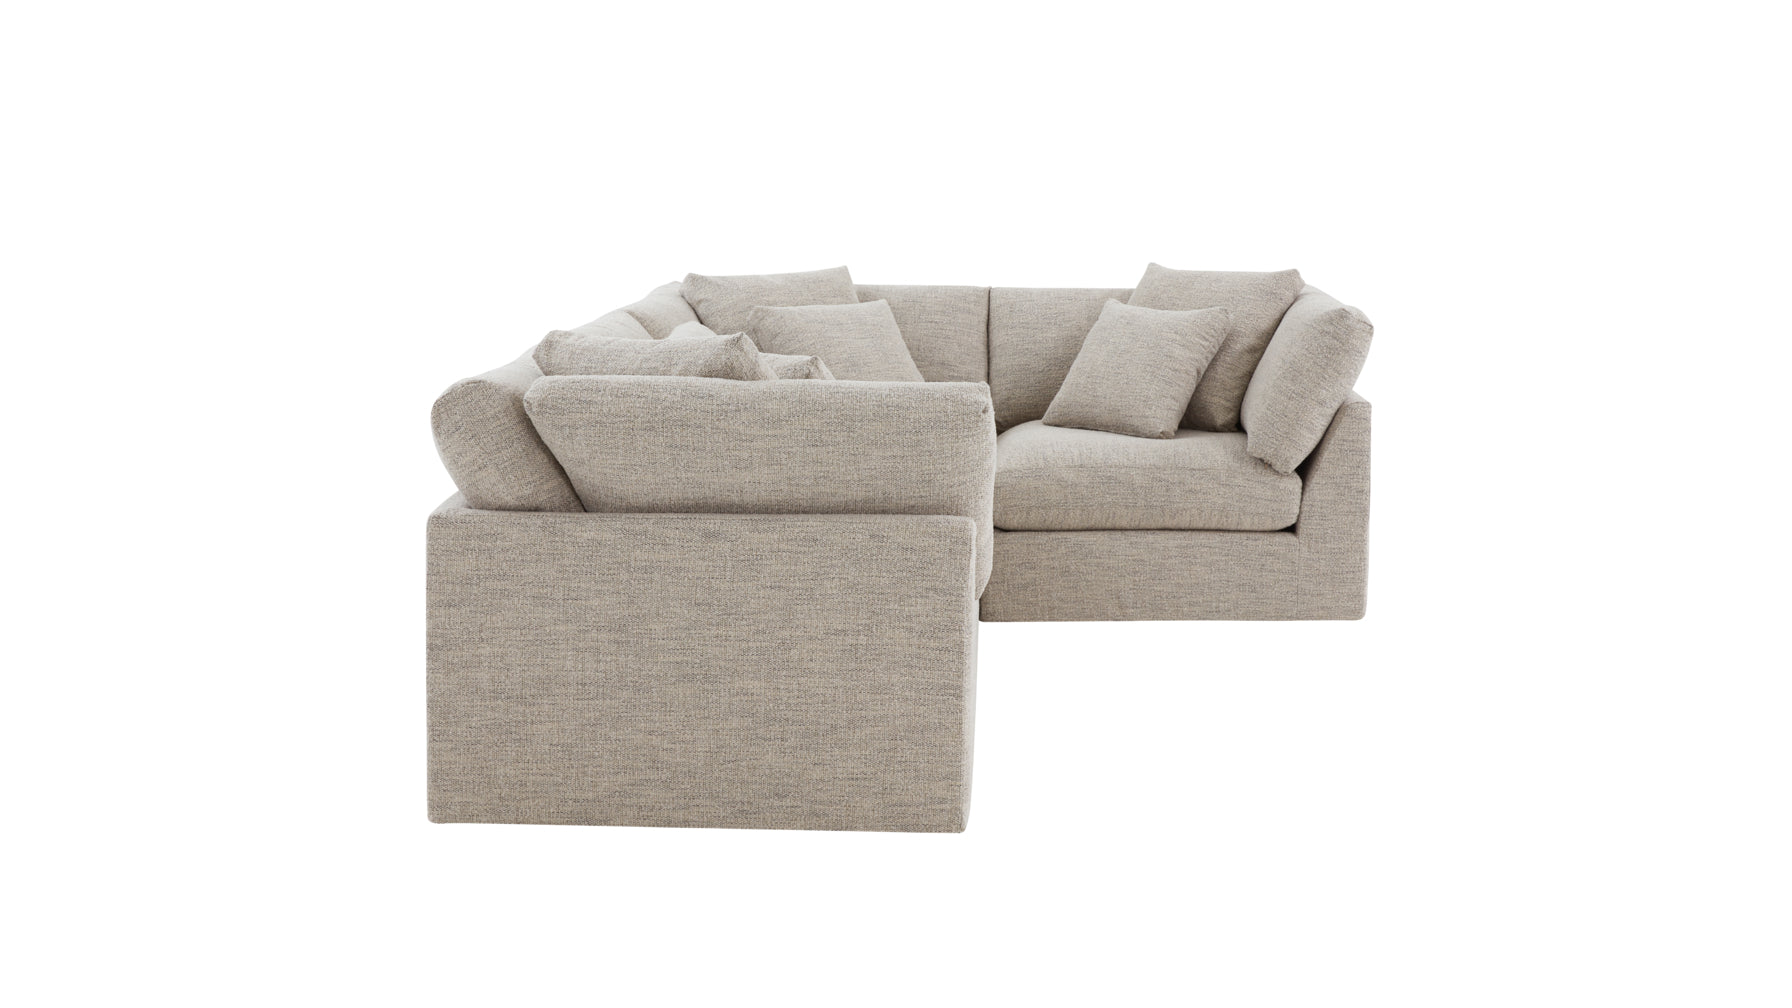 Get Together™ 4-Piece Modular Sectional Closed, Large, Oatmeal - Image 5